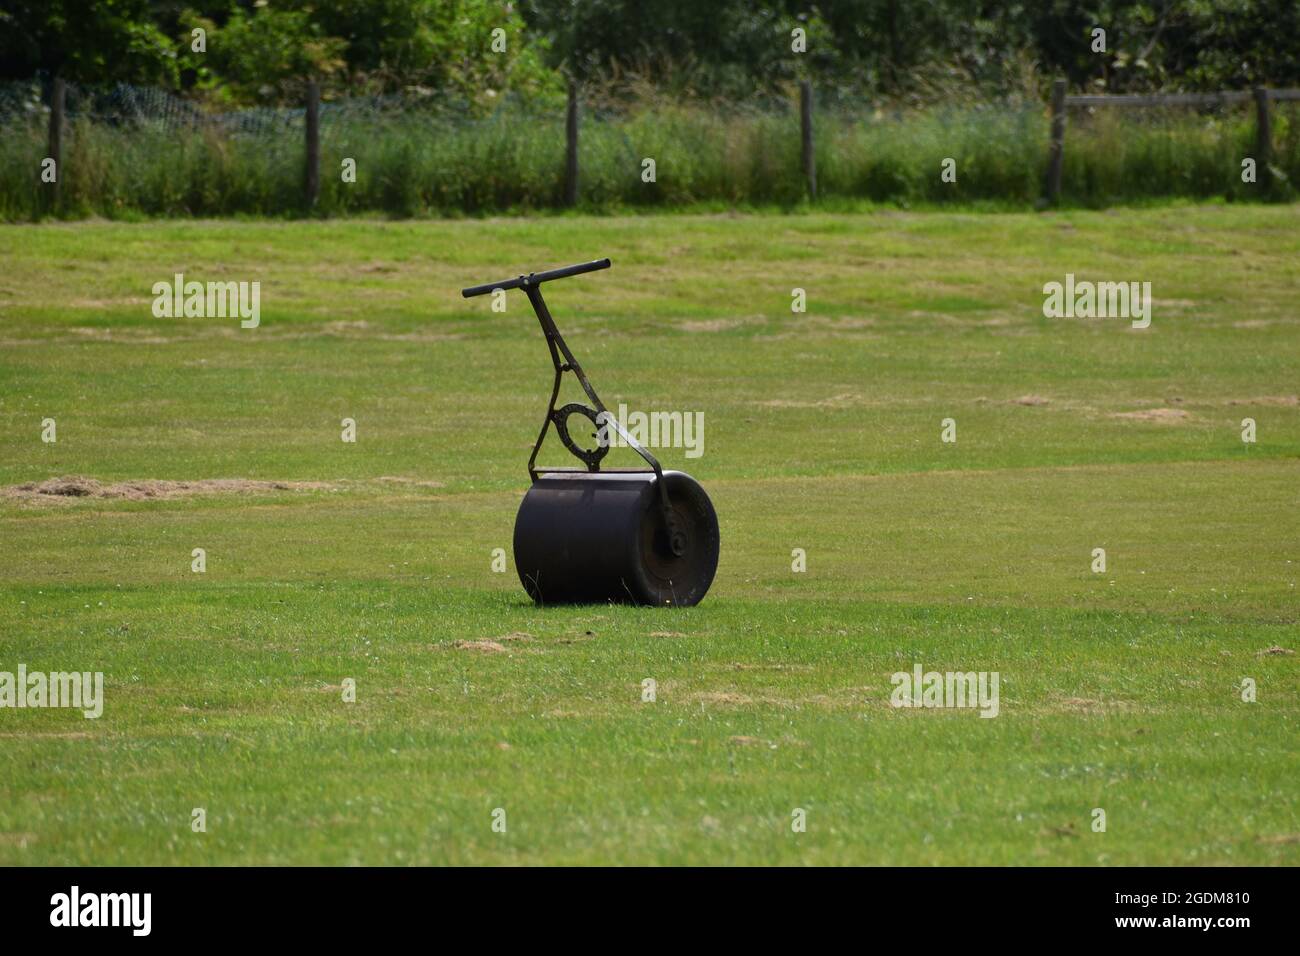 Manual roller in a countryside sports pitch Stock Photo